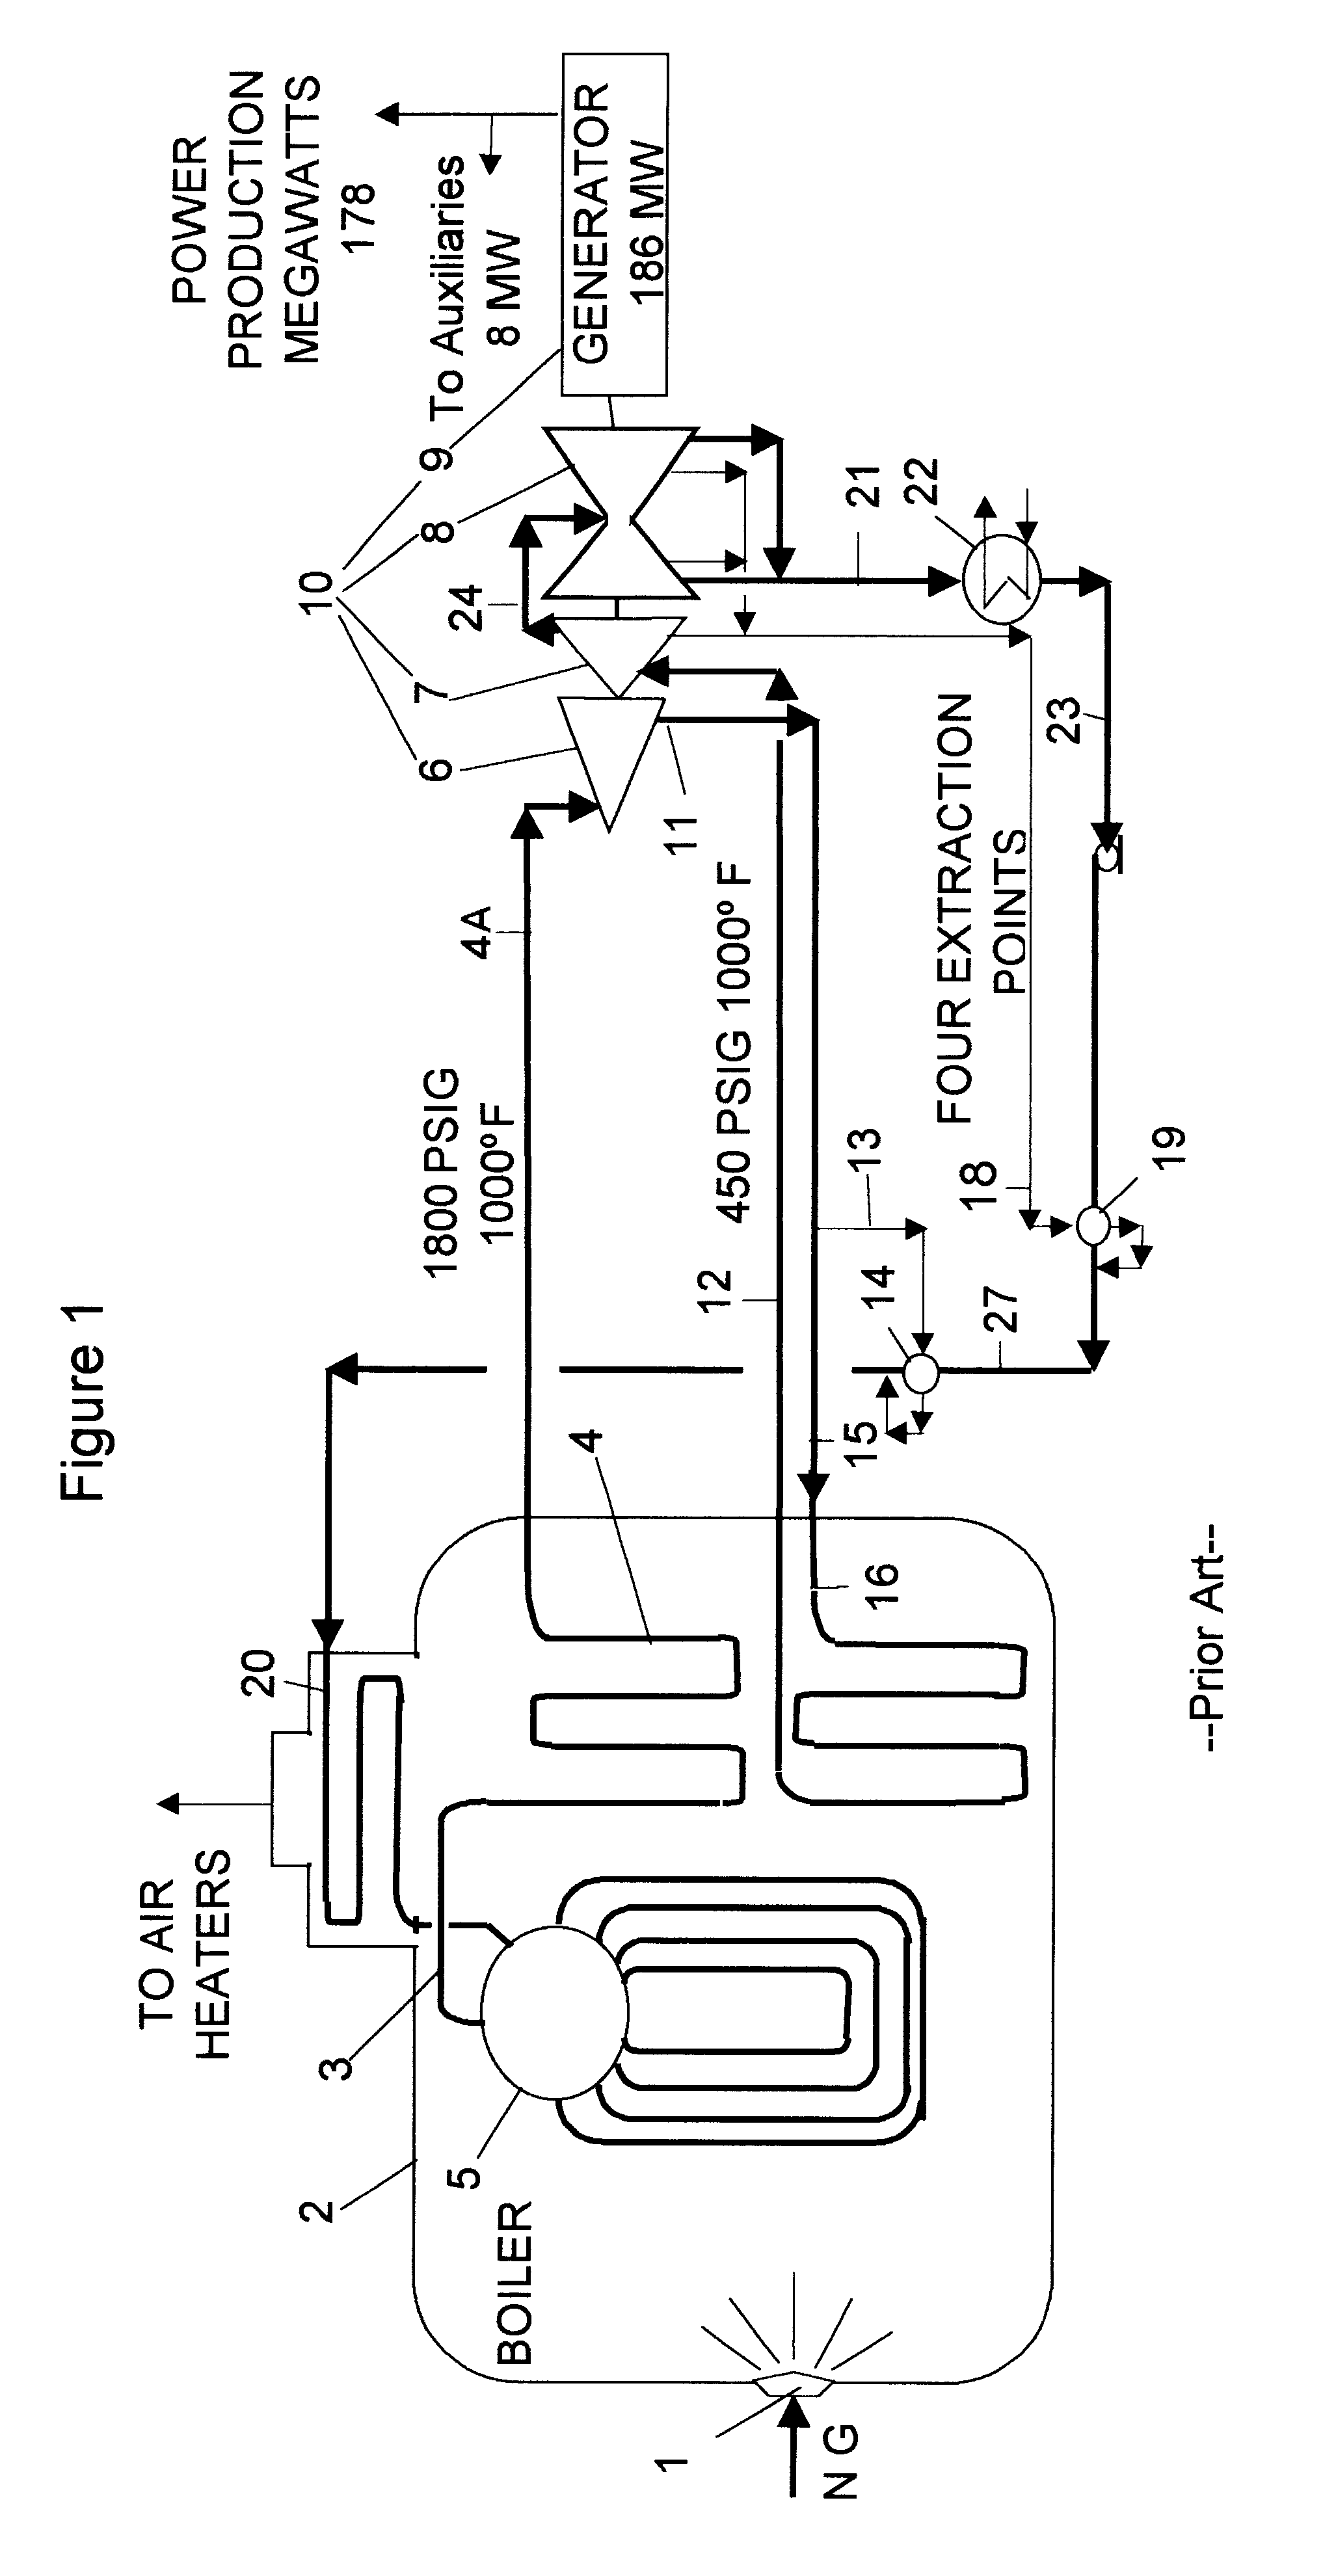 Process for generating electric power